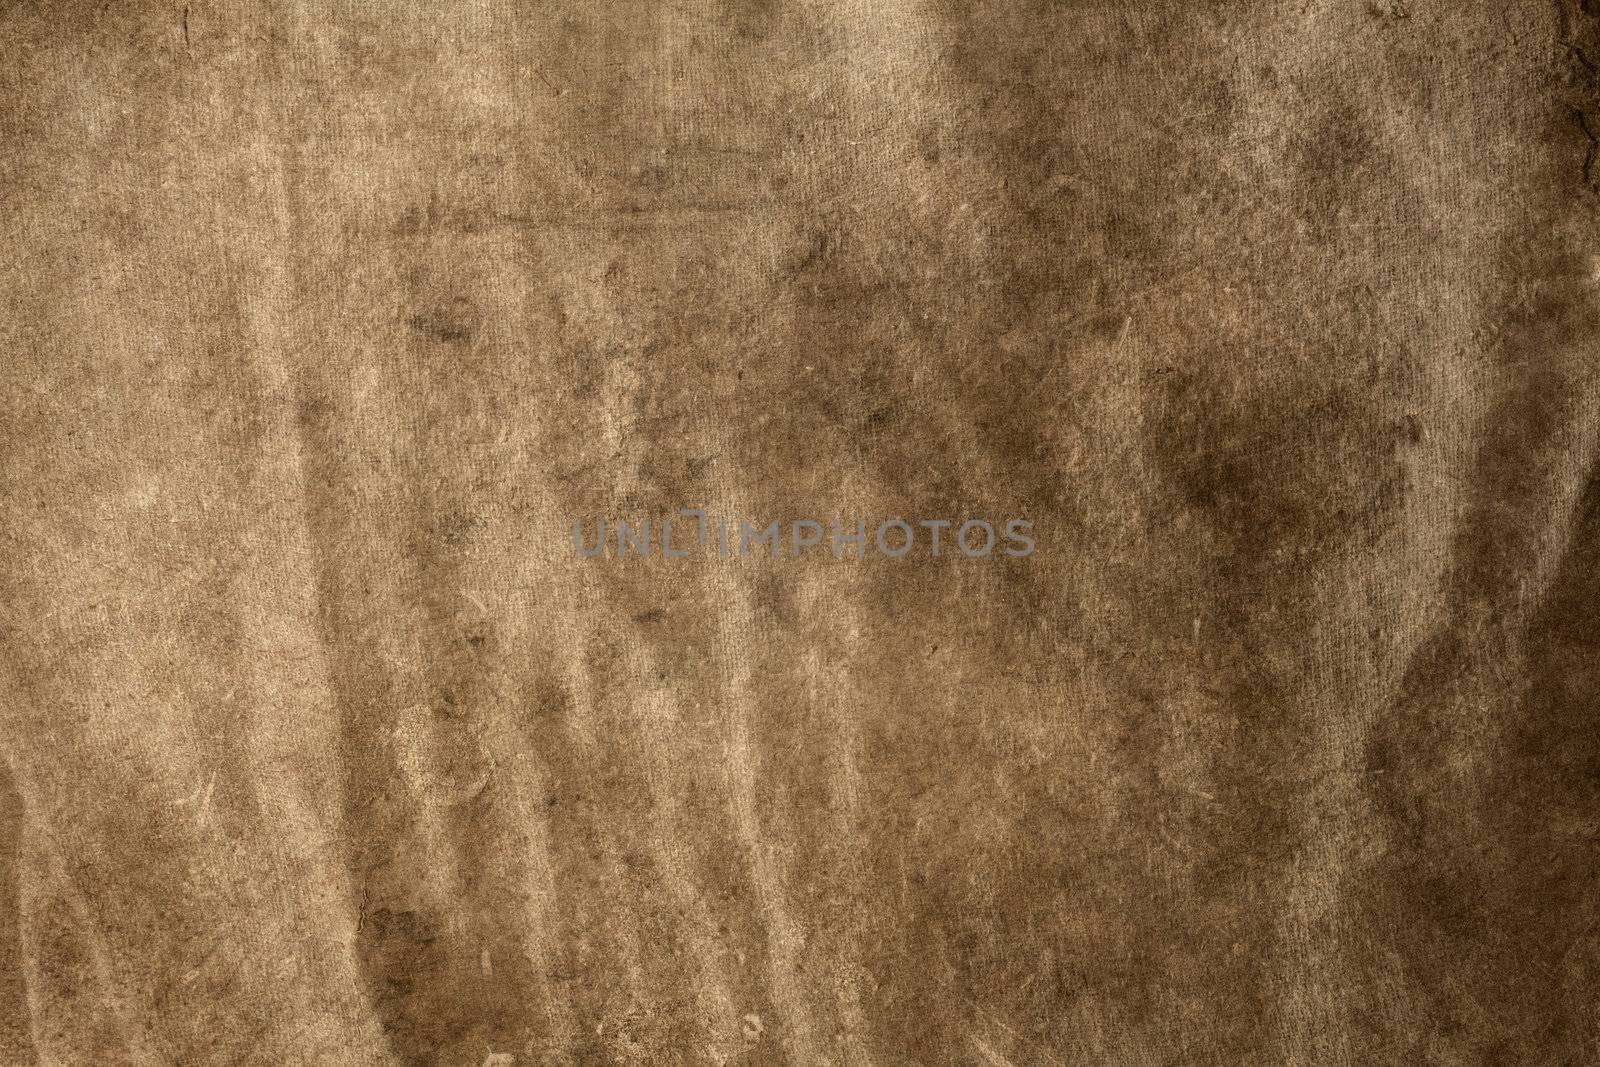 Dirty and stained brown background texture